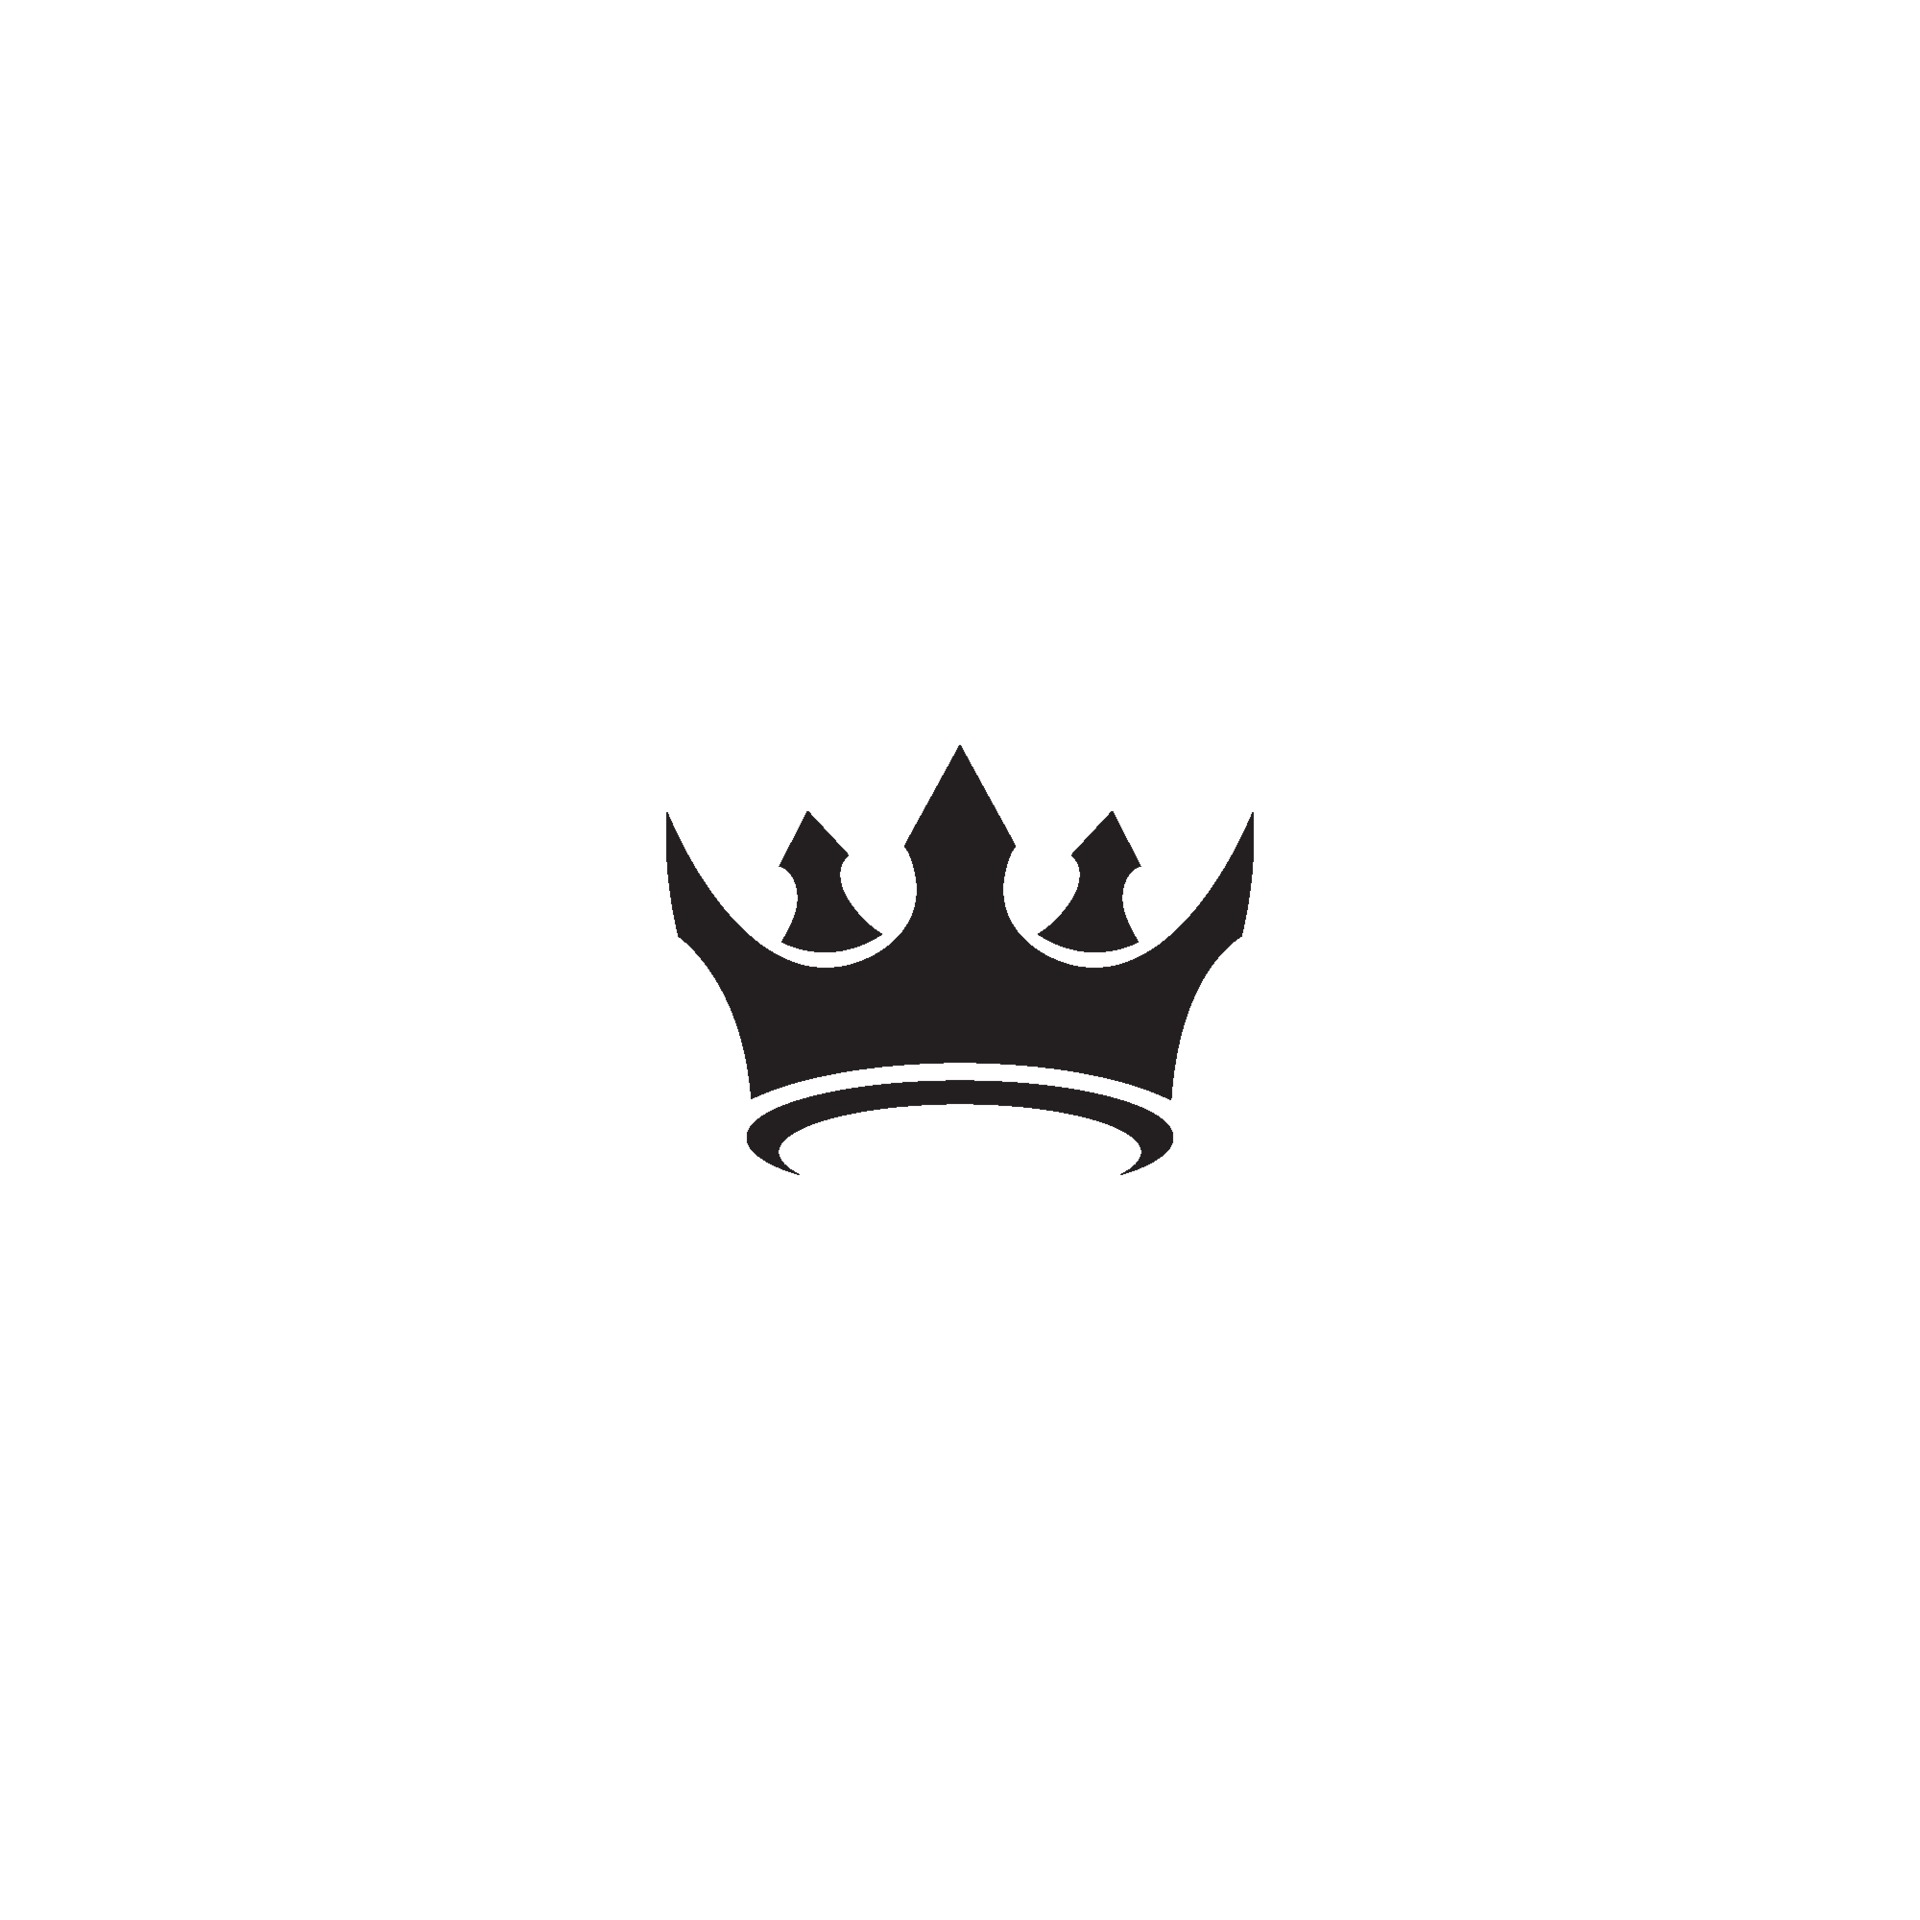 Crown Logo Design Vector Art, Icons, and Graphics for Free Download